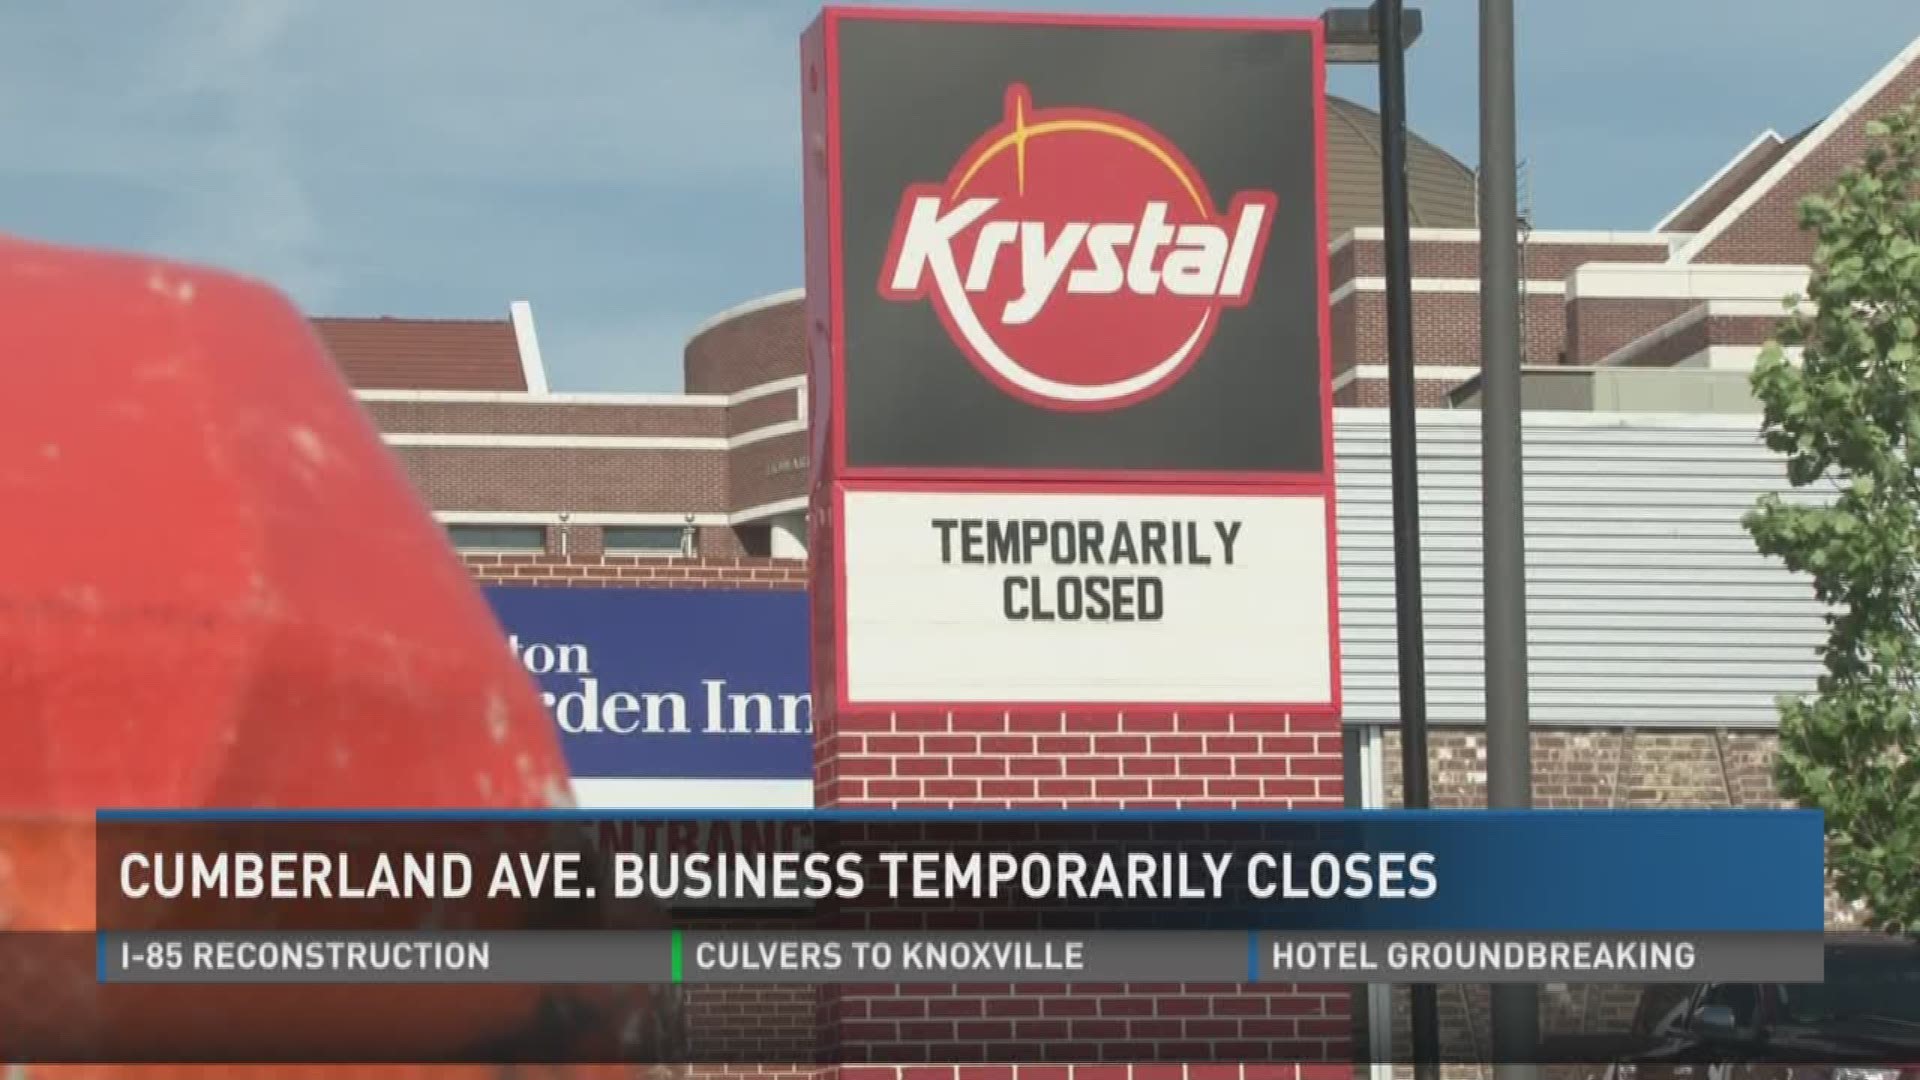 The Cumberland Avenue construction has temporarily closed a Krystal due to lack of business.